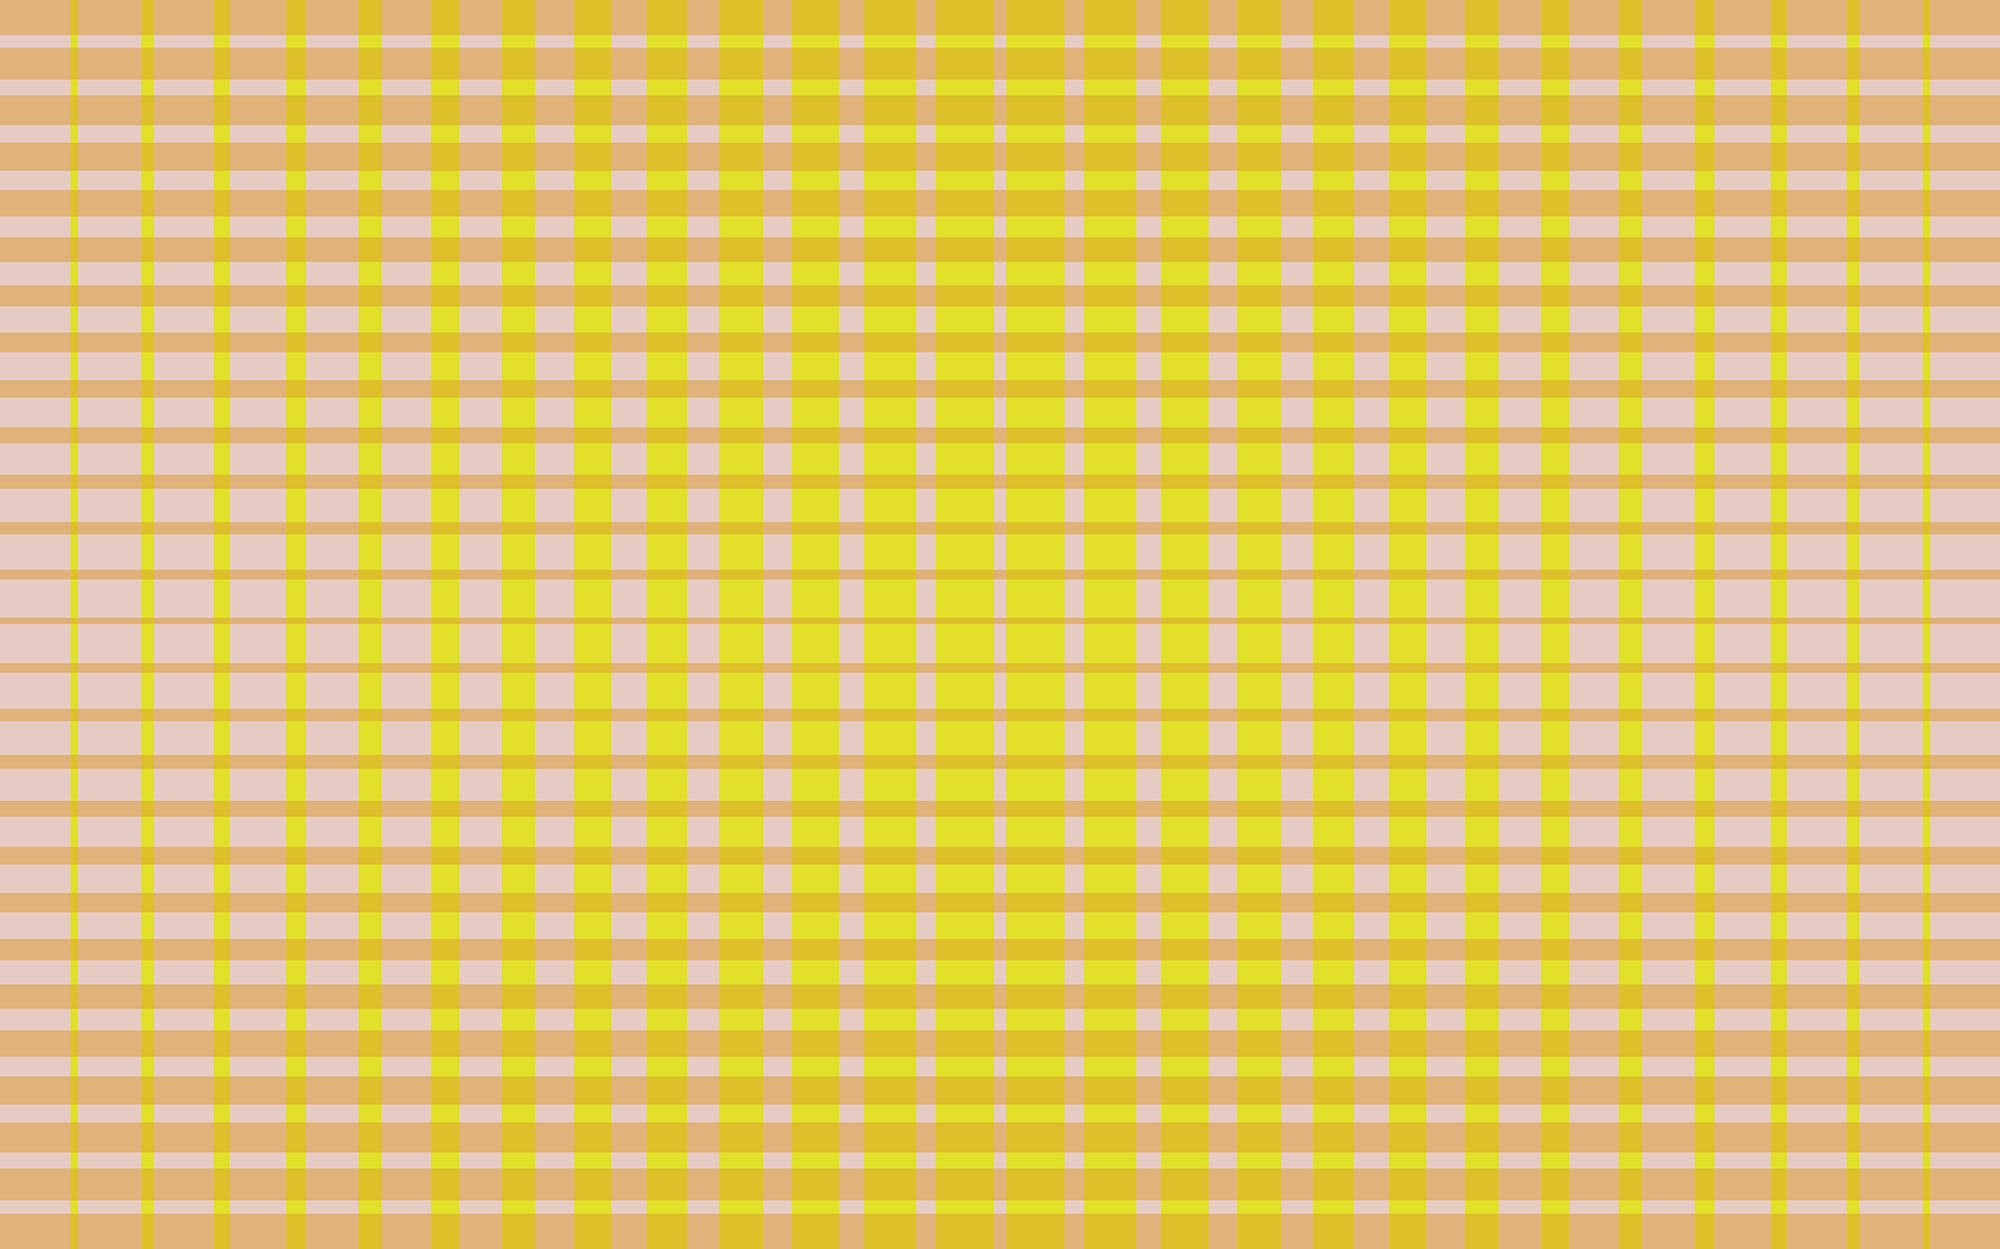 Chequered yellow-apricot